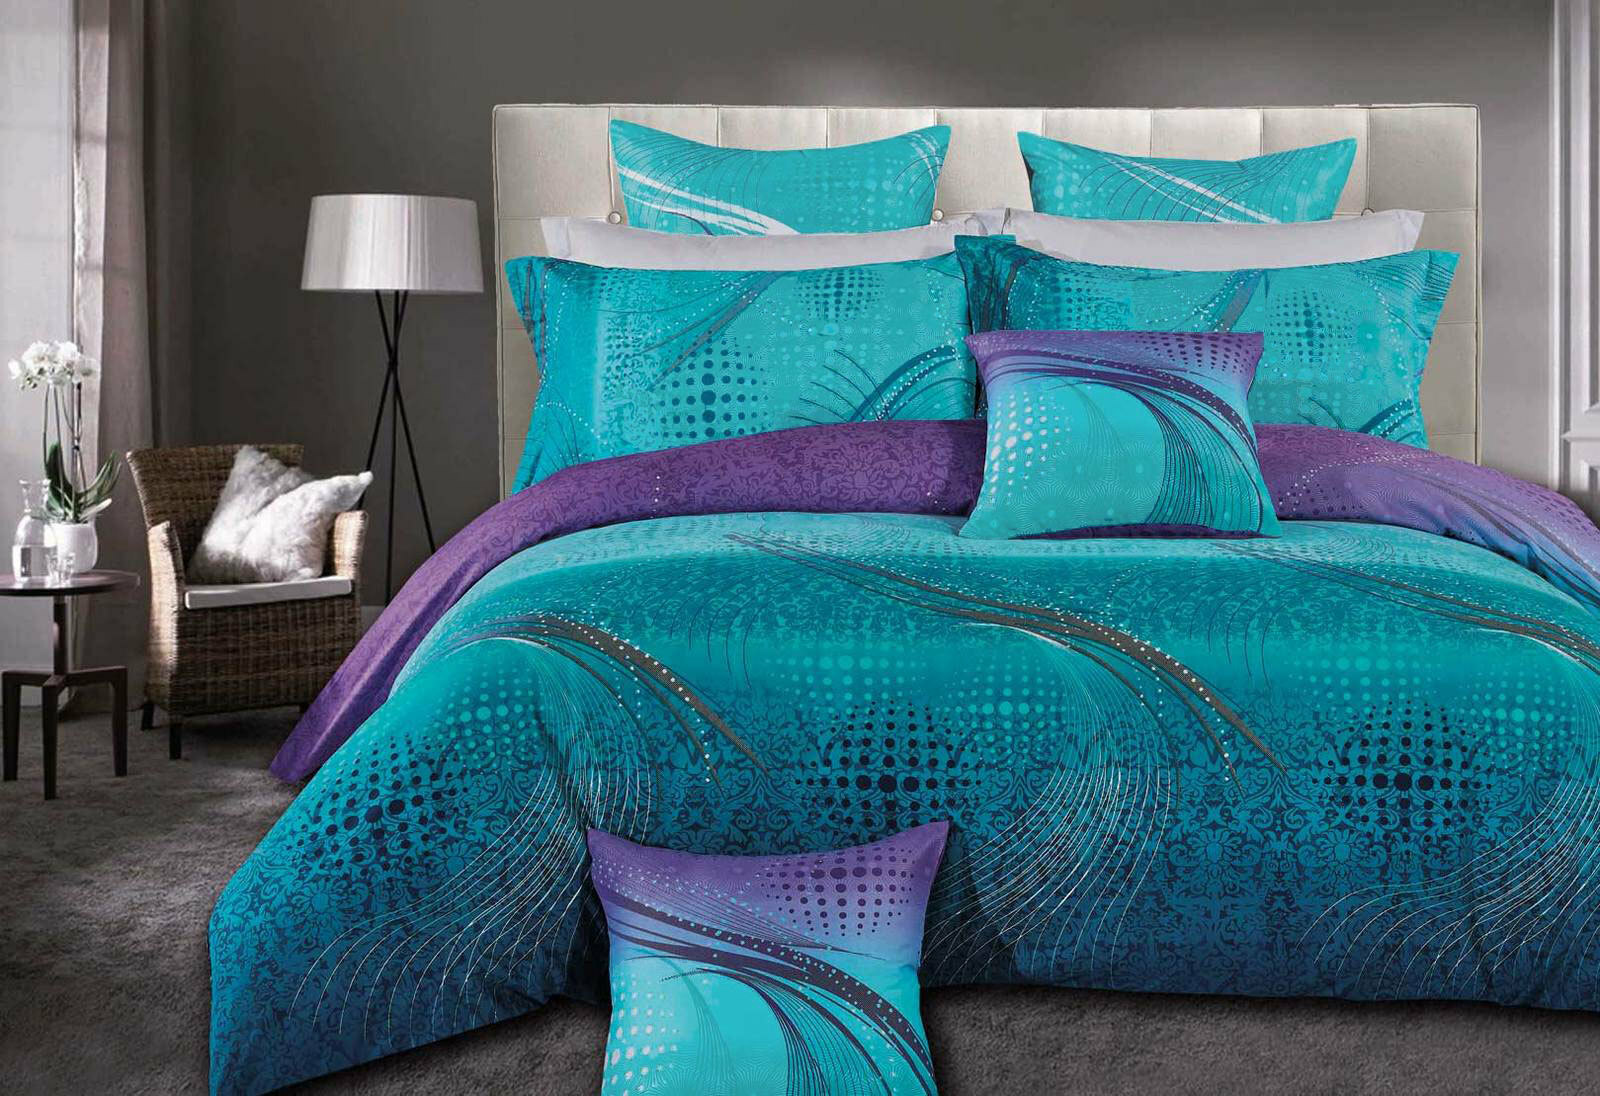 Get the best quilt covers from Weavve Home here.